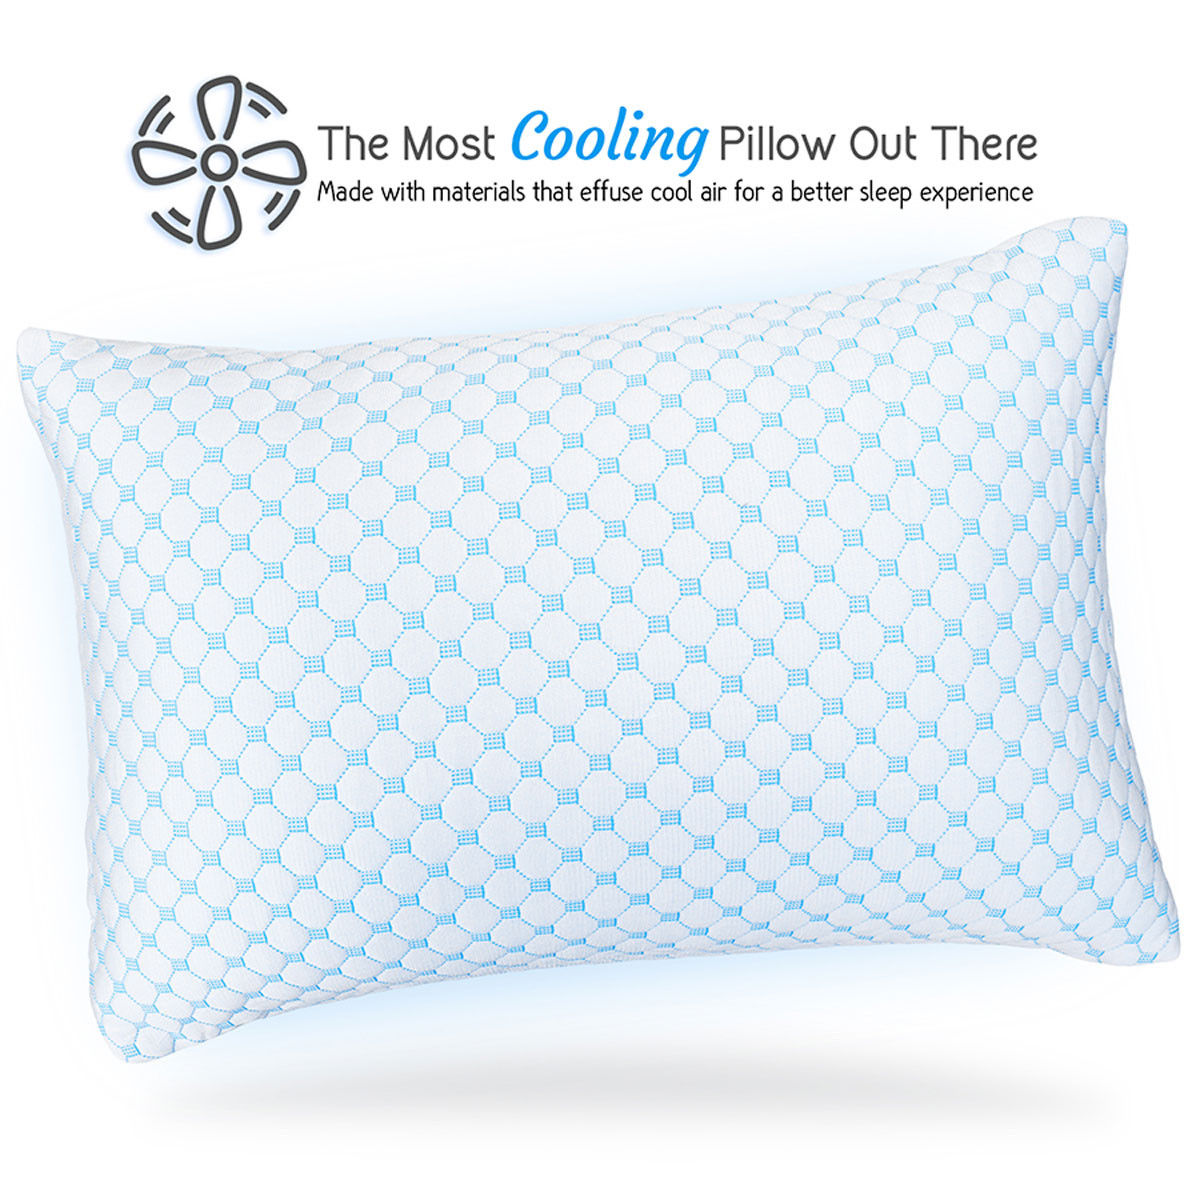 Does the Clara Clark pillow have a washable, removable cover?